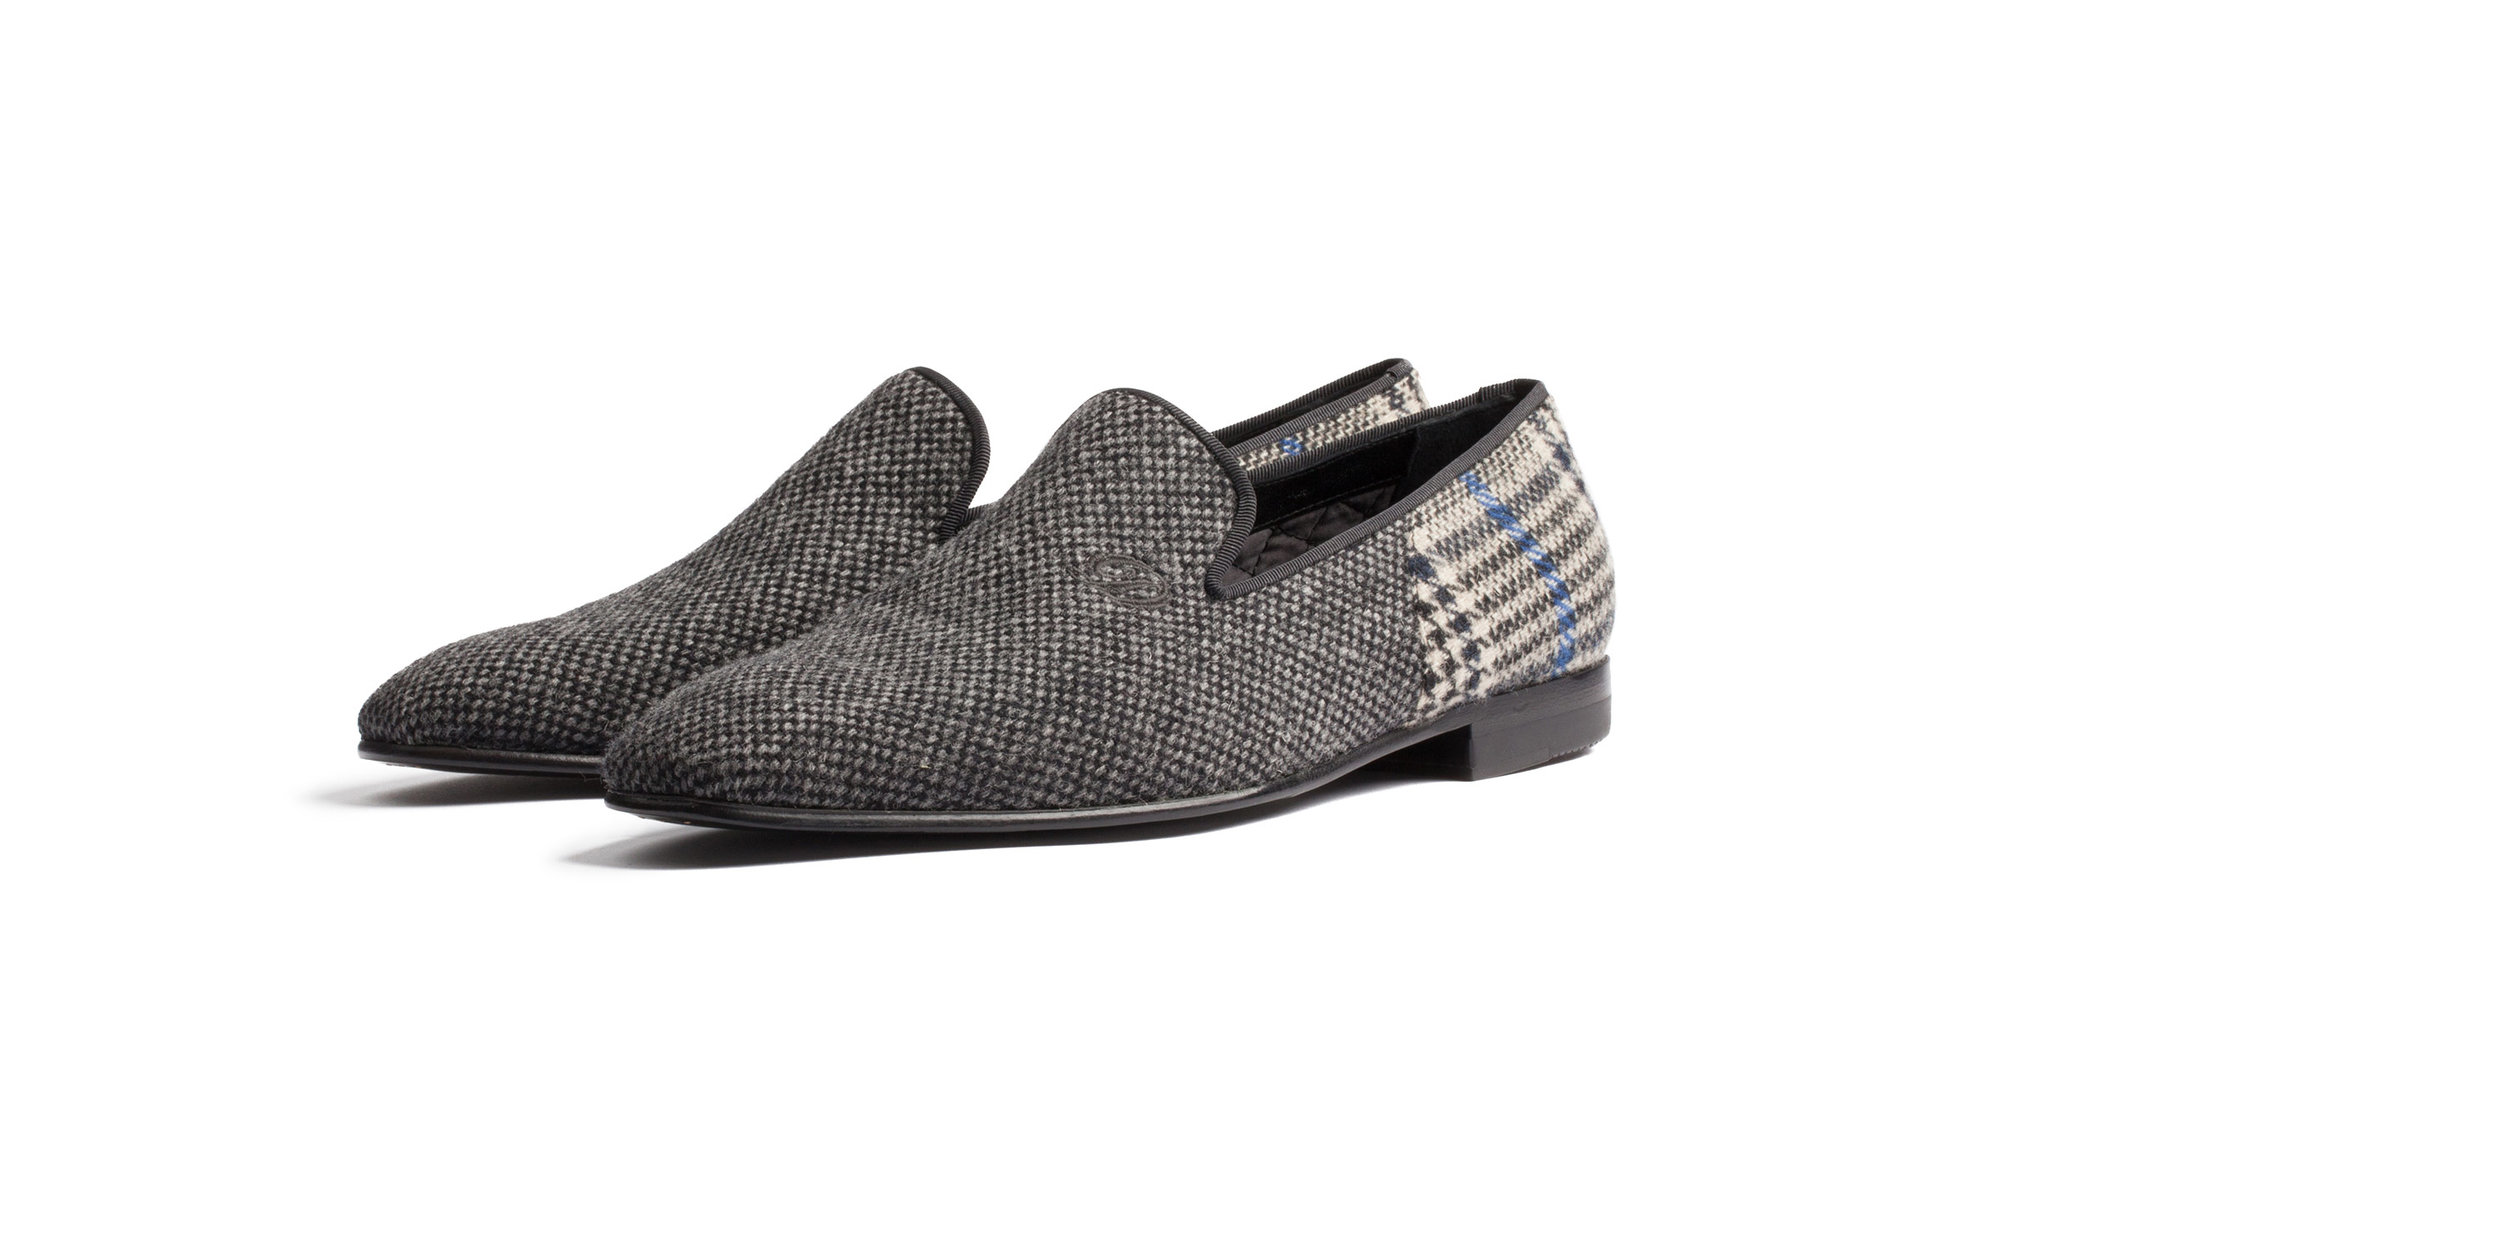 Donhall & Bell Slipper Shoes